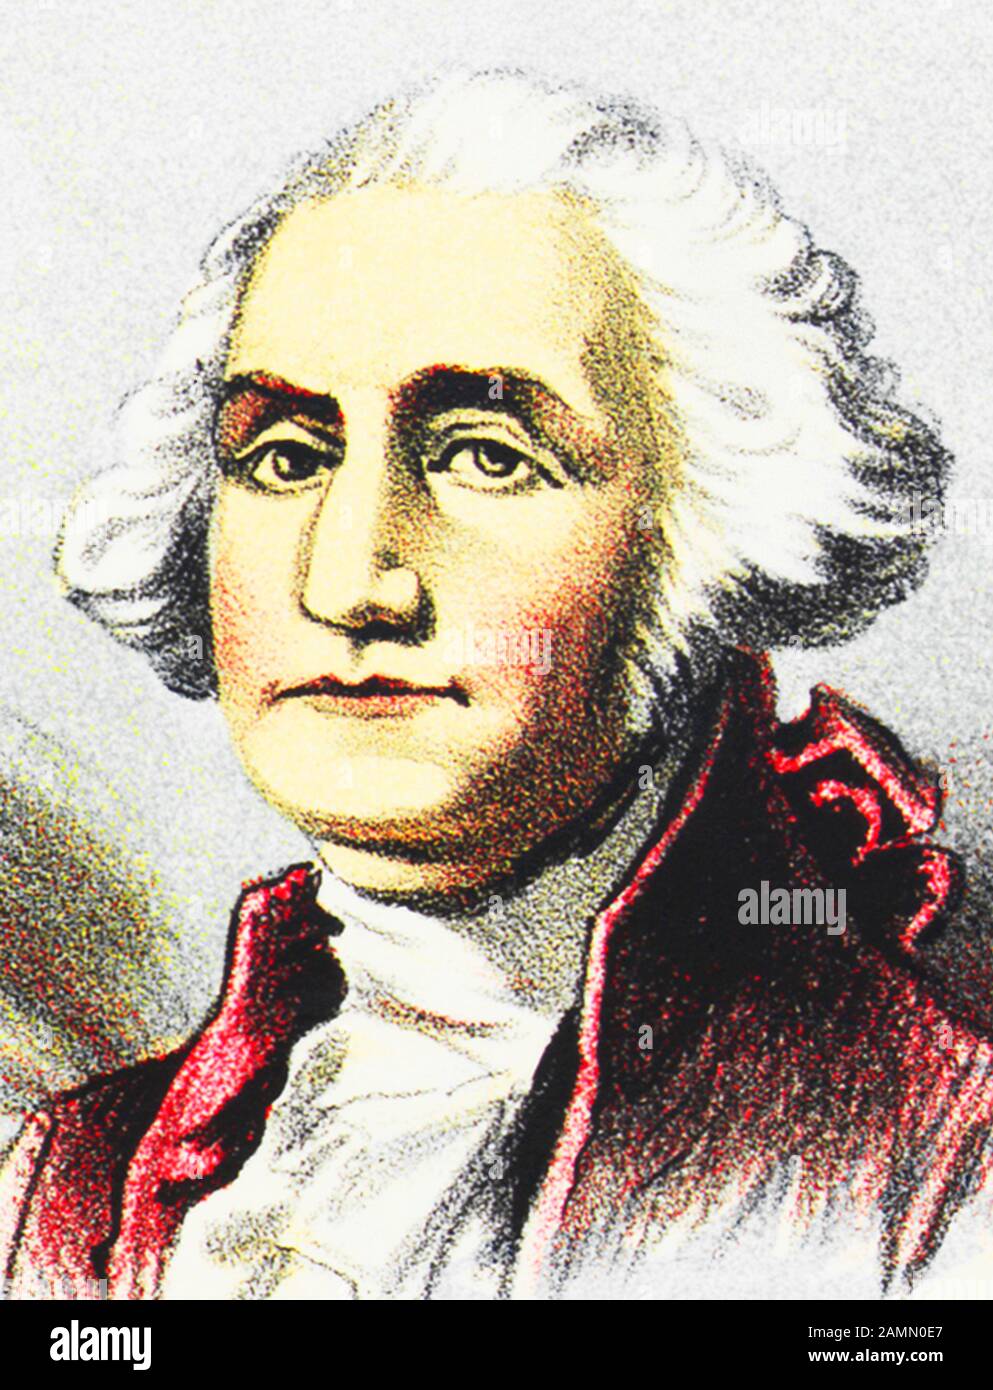 Vintage portrait of George Washington (1732 - 1799) – Commander of the Continental Army in the American Revolutionary War / War of Independence (1775 – 1783) and the first US President (1789 - 1797). Detail from a print circa 1884 by The Continental Publishing Co of Chicago. Stock Photo